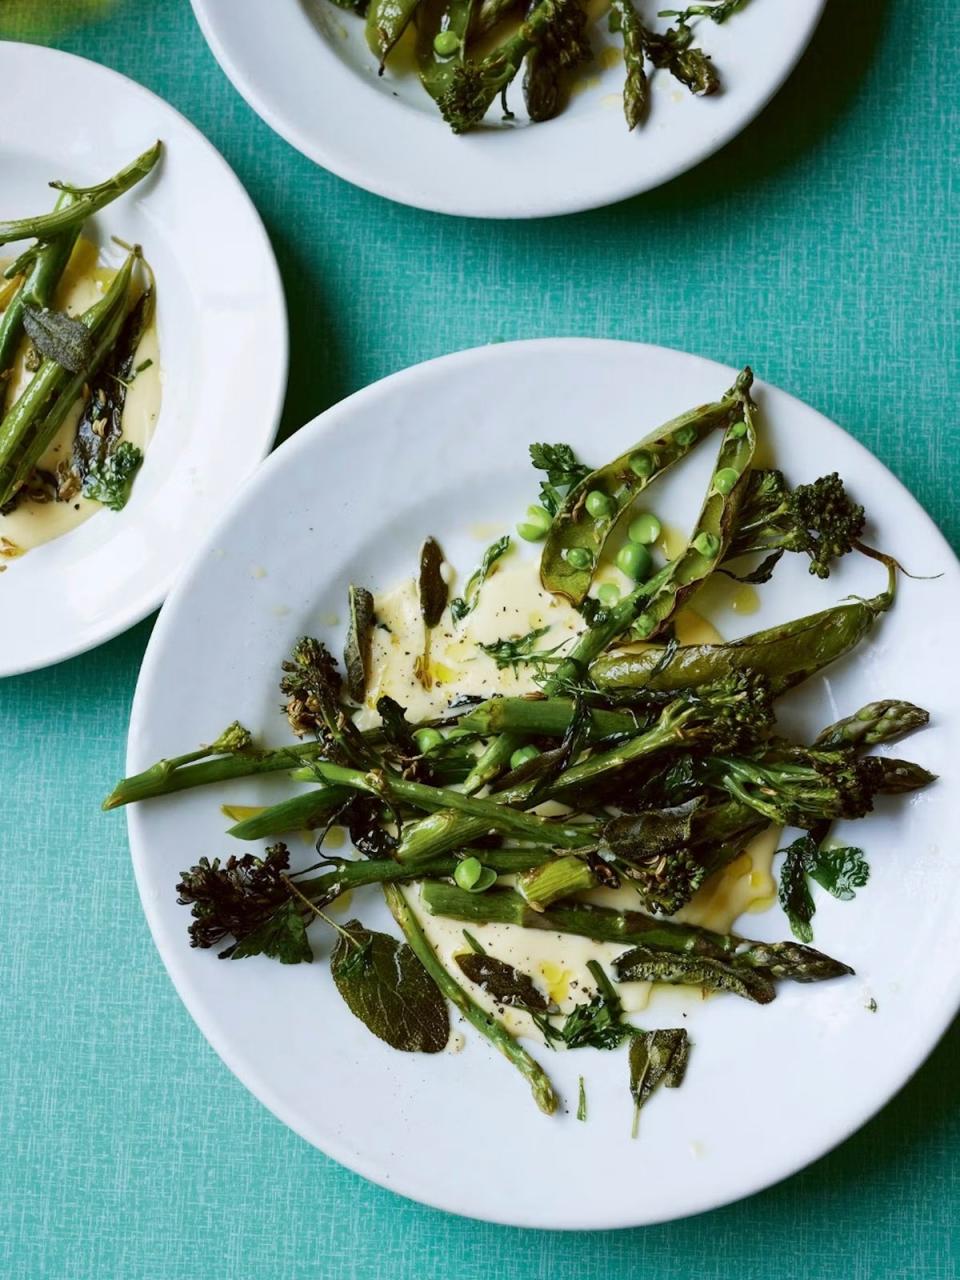 Roast spring vegetables with mustard cheese sauce, a recipe from the new book (Anna Jones/HarperCollins)